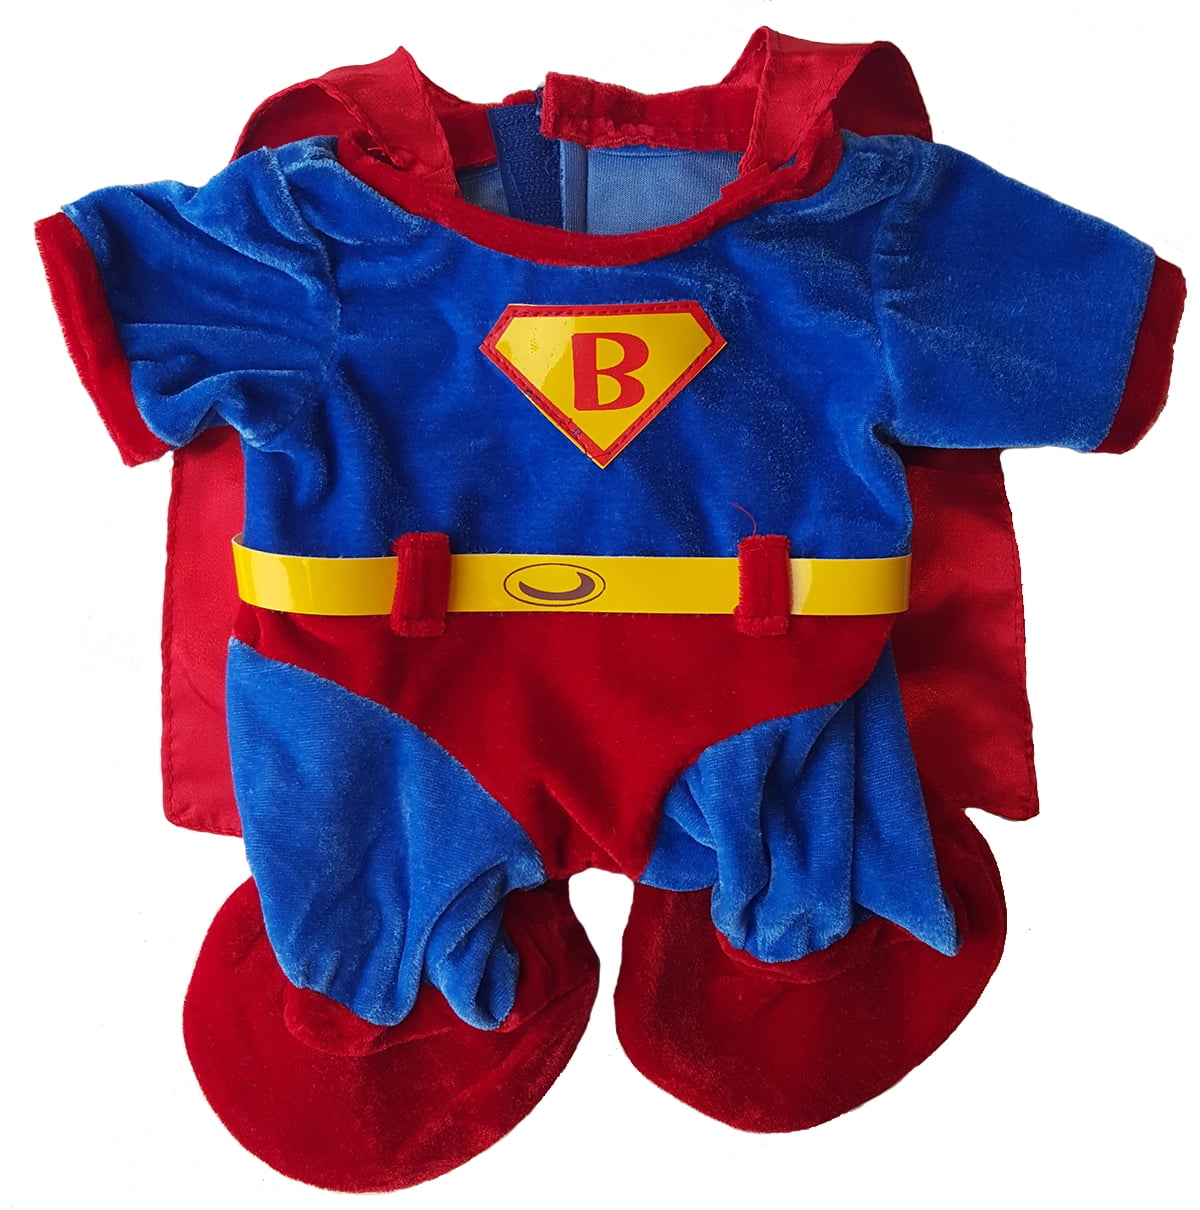 BEAR" Teddy Bear Clothes FITS MOST 14"-18" BUILD A BEAR ANIMALS NEW Details about   "SUPERMAN 